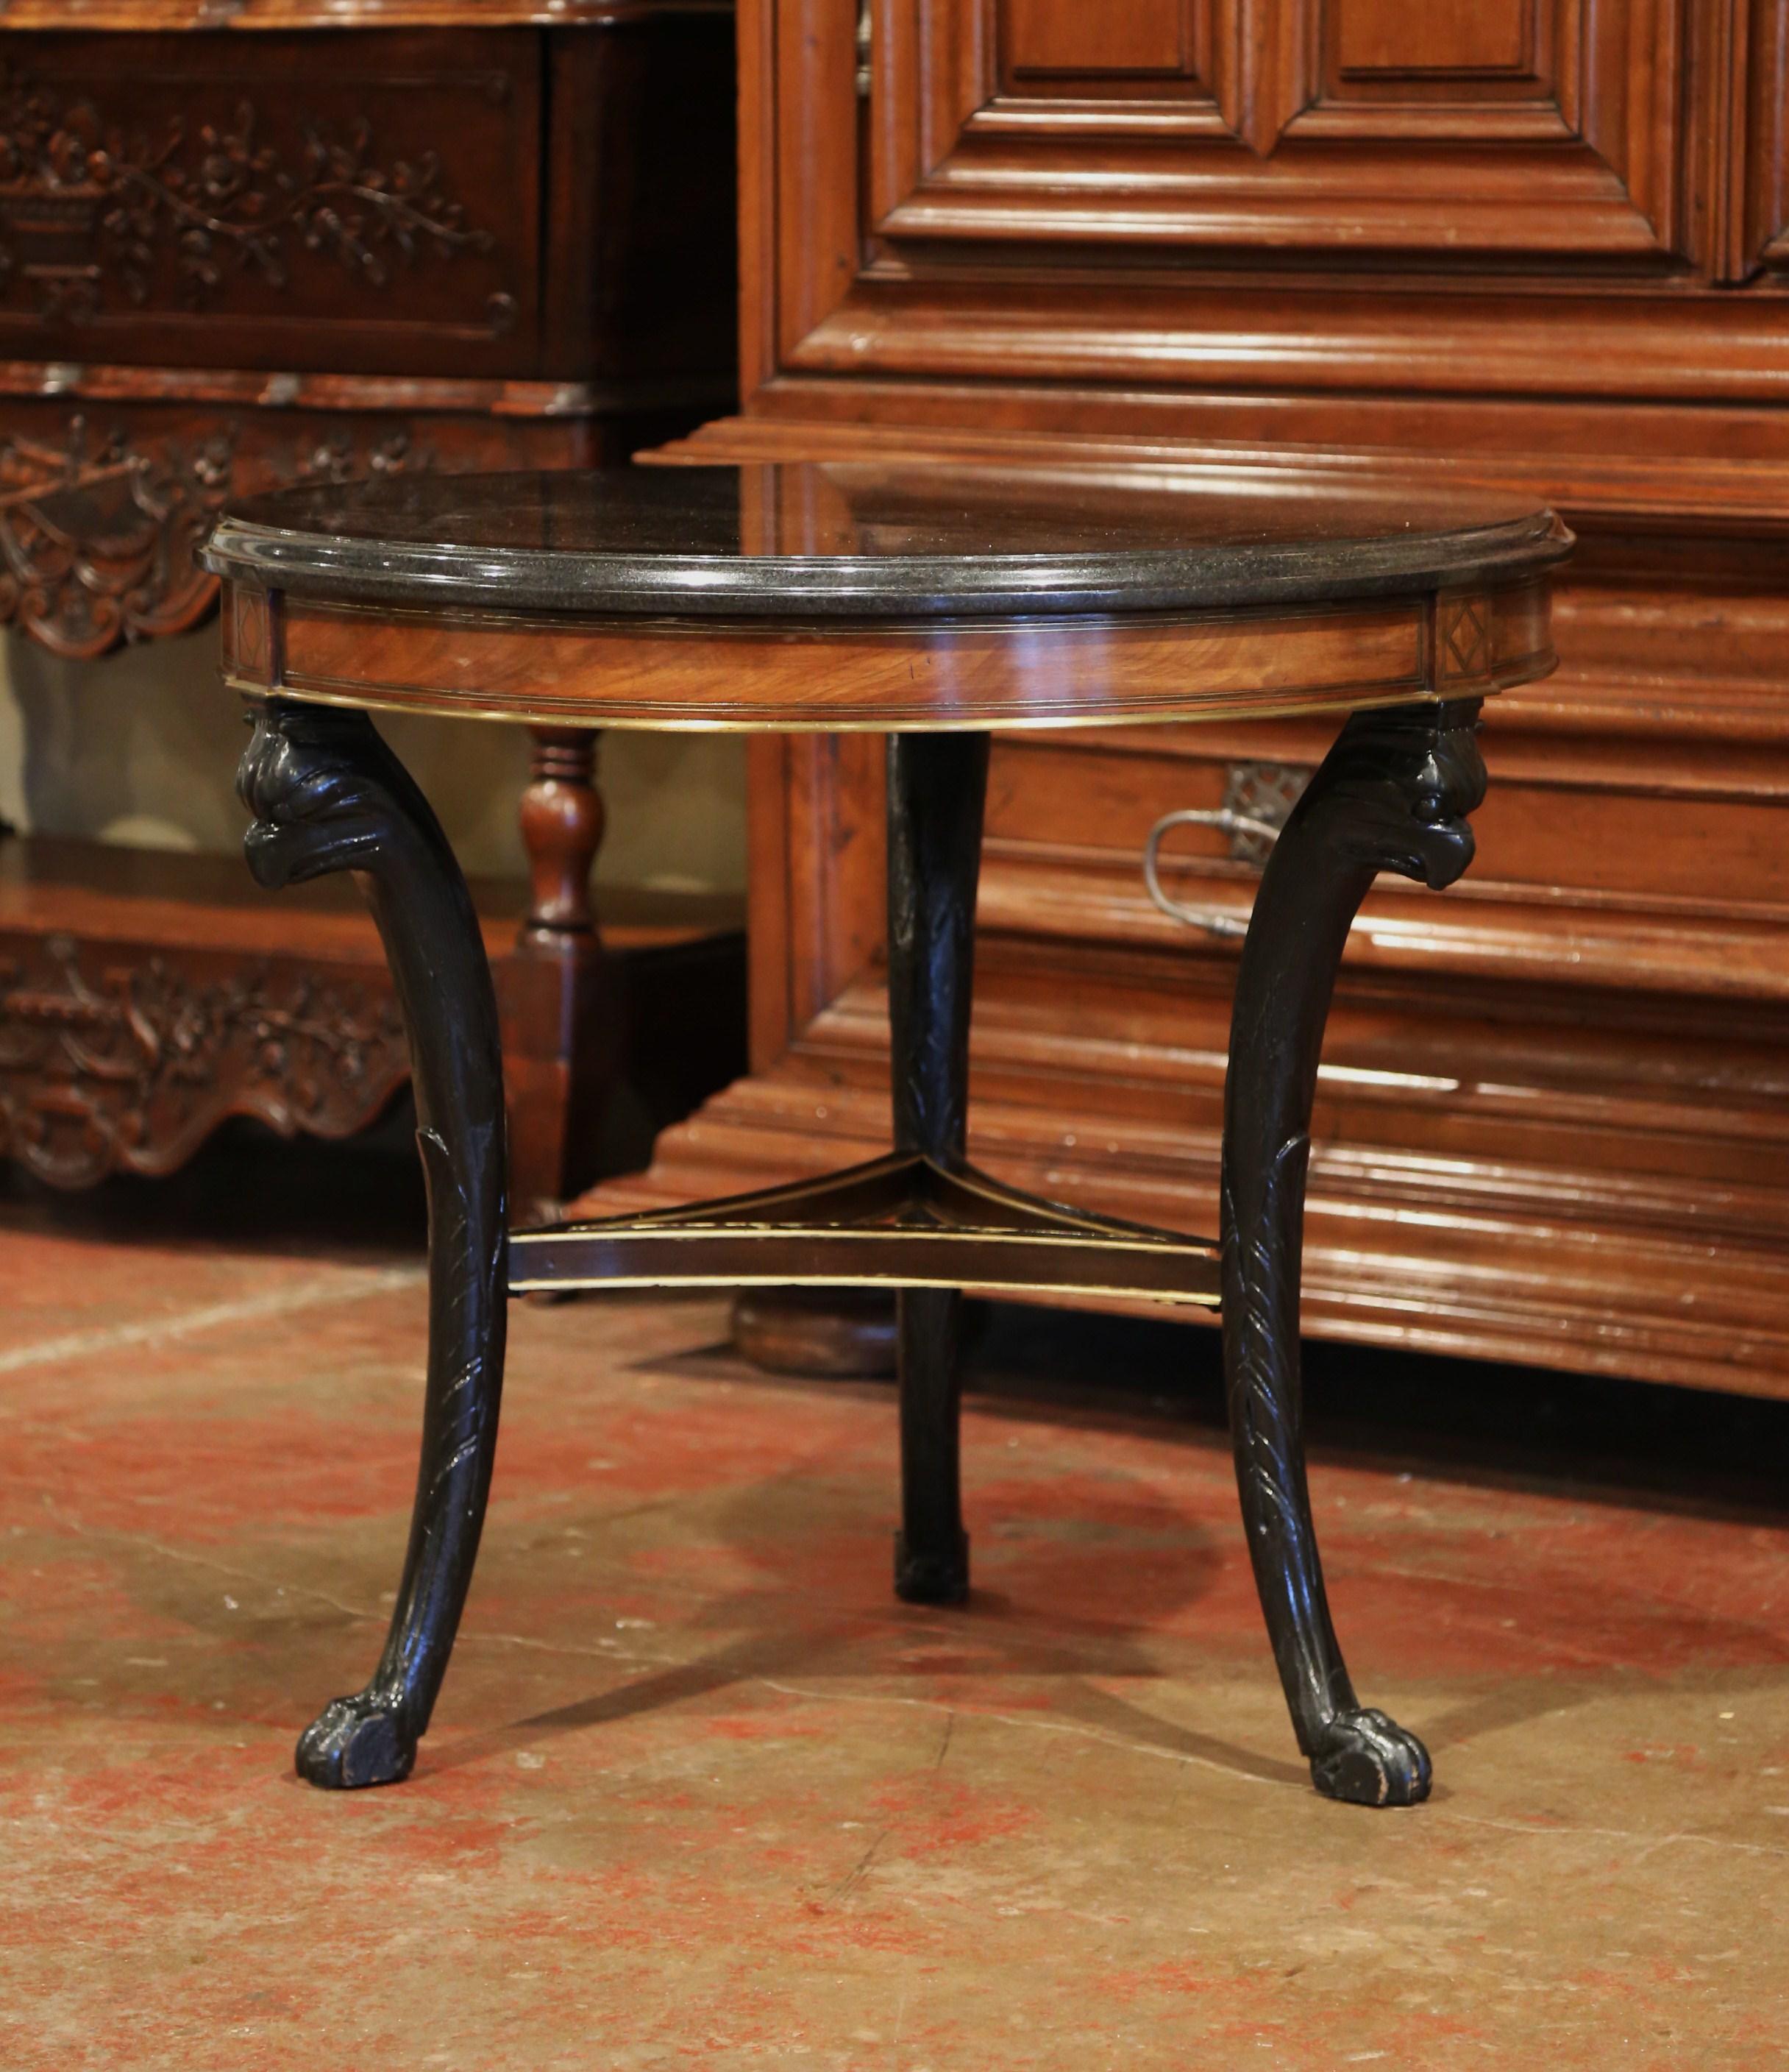 Place this antique round centre table in your entry or between two fauteuils. Crafted in France, circa 1860, the Napoleon III gueridon is carved in mahogany wood with an ebonized finish. The side table stands on three curved legs finished with paw